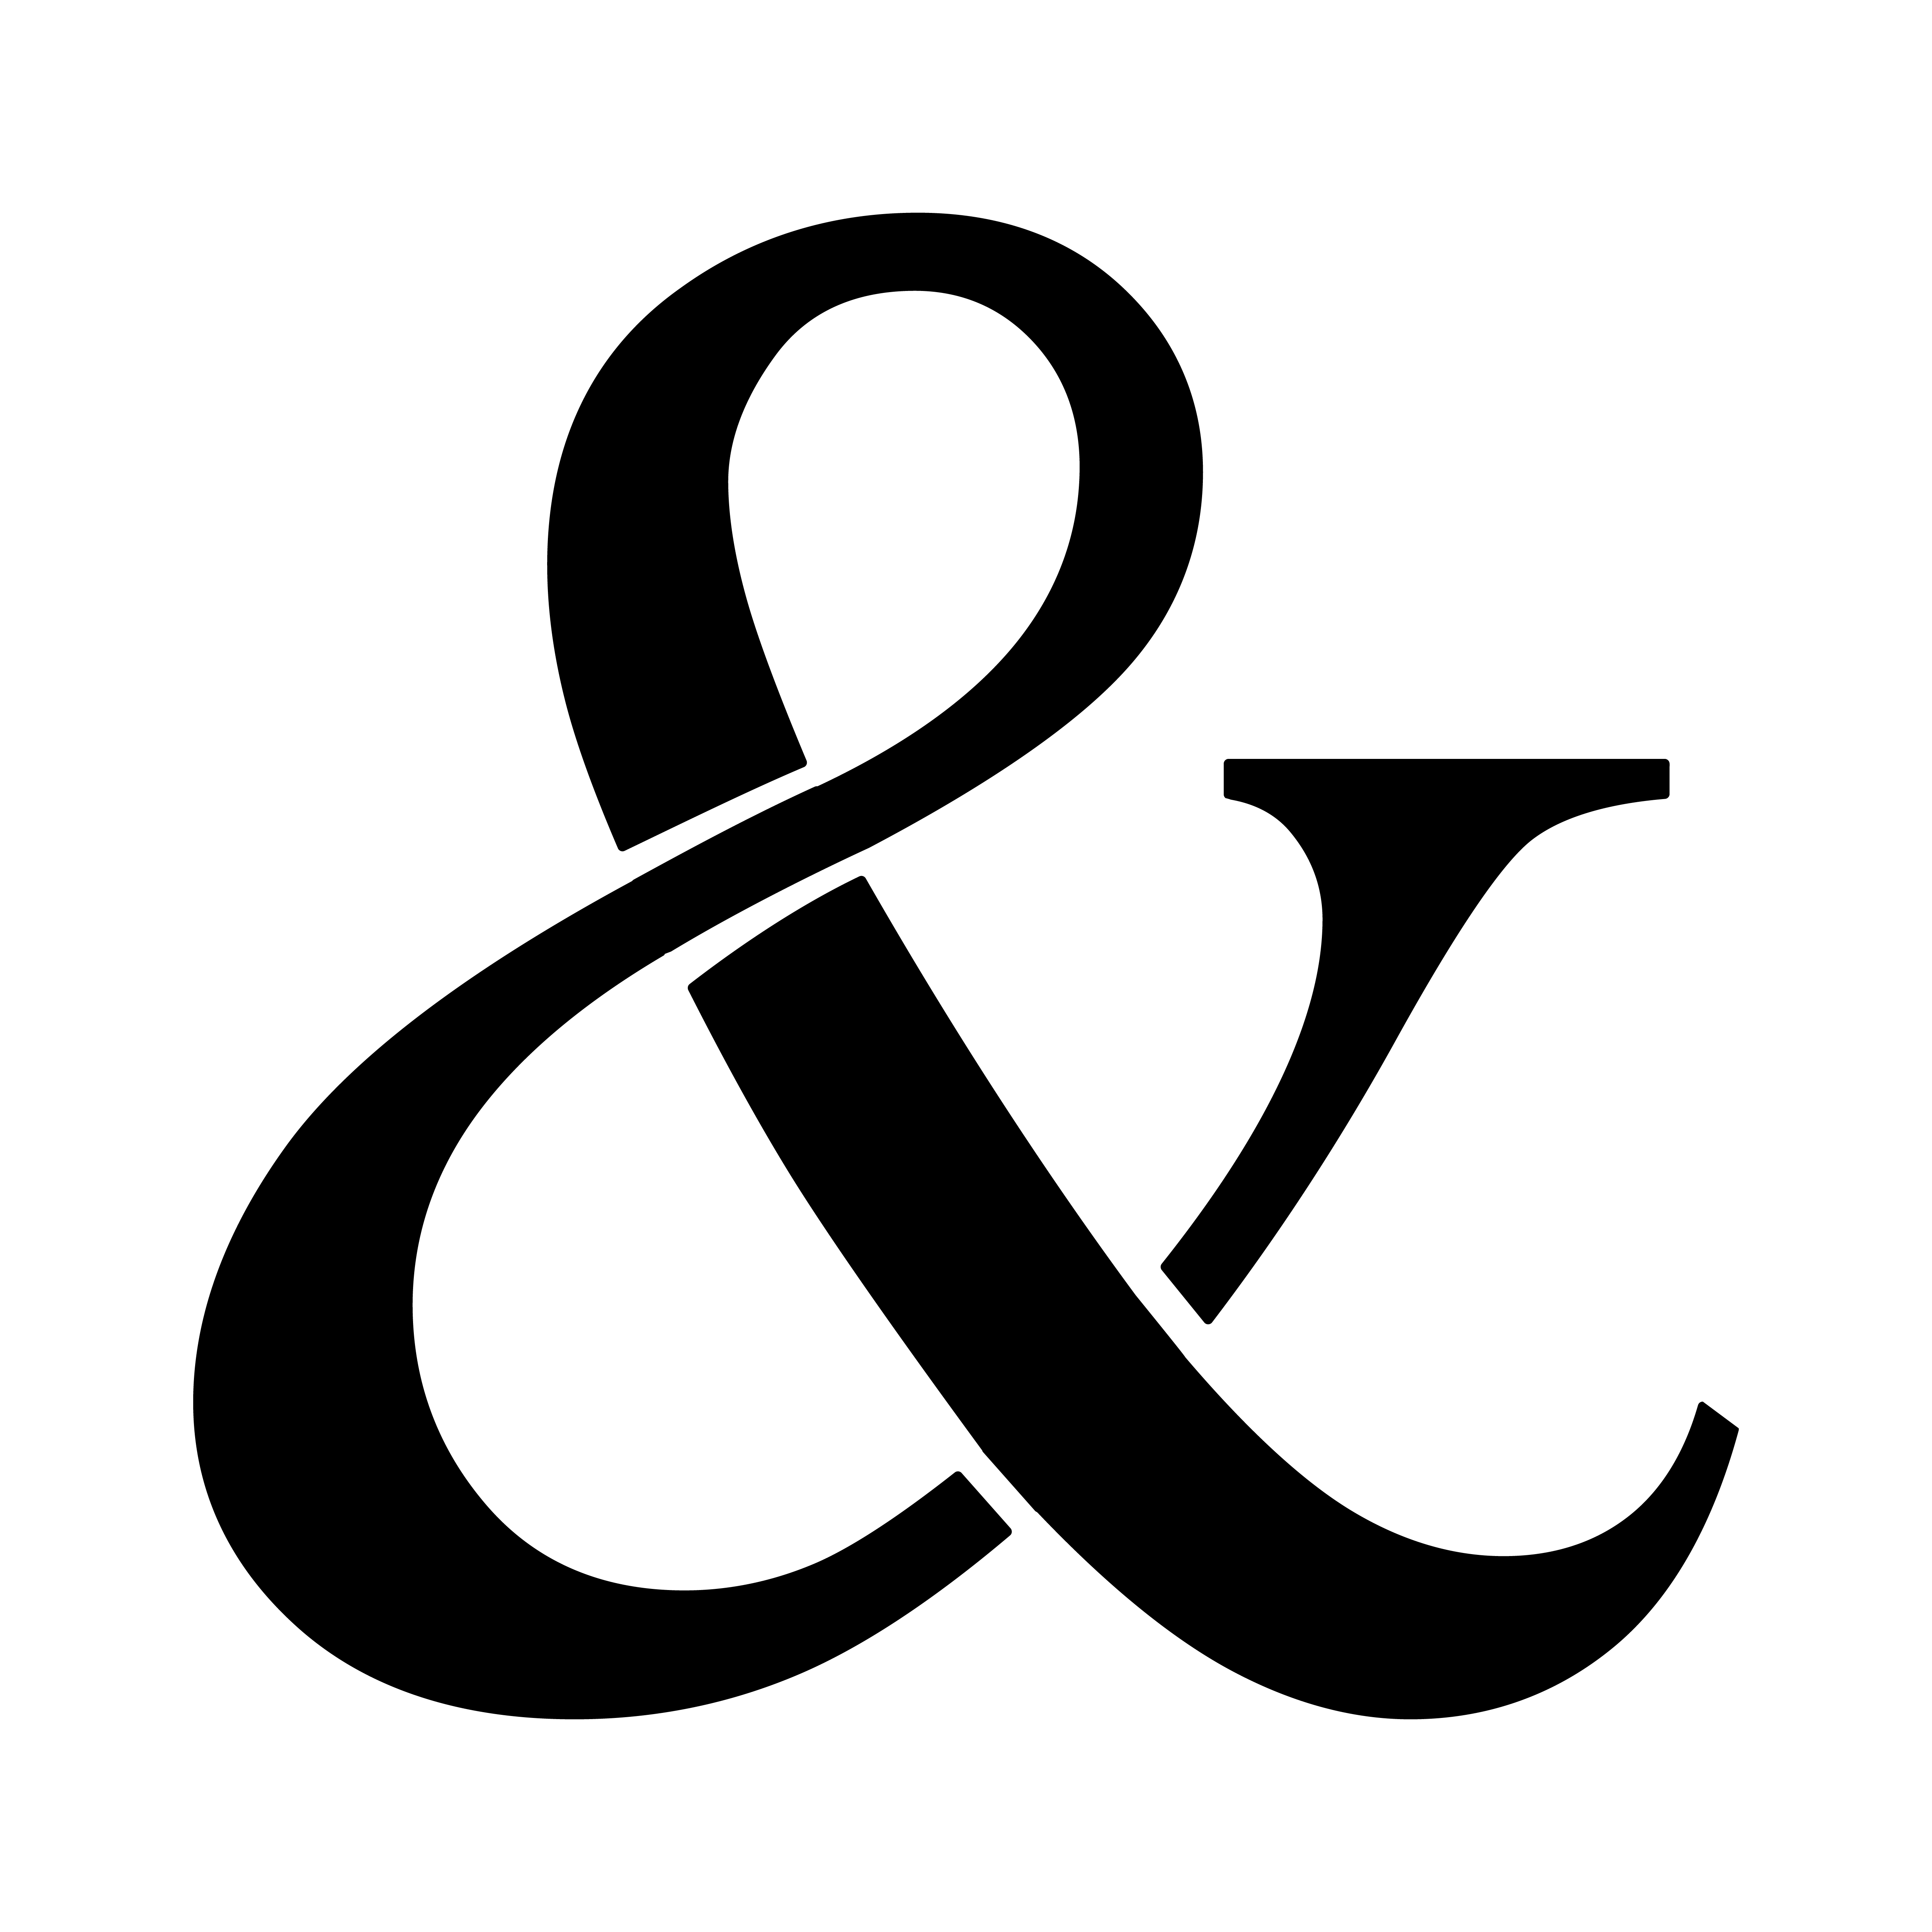 ampersand-vector-art-icons-and-graphics-for-free-download